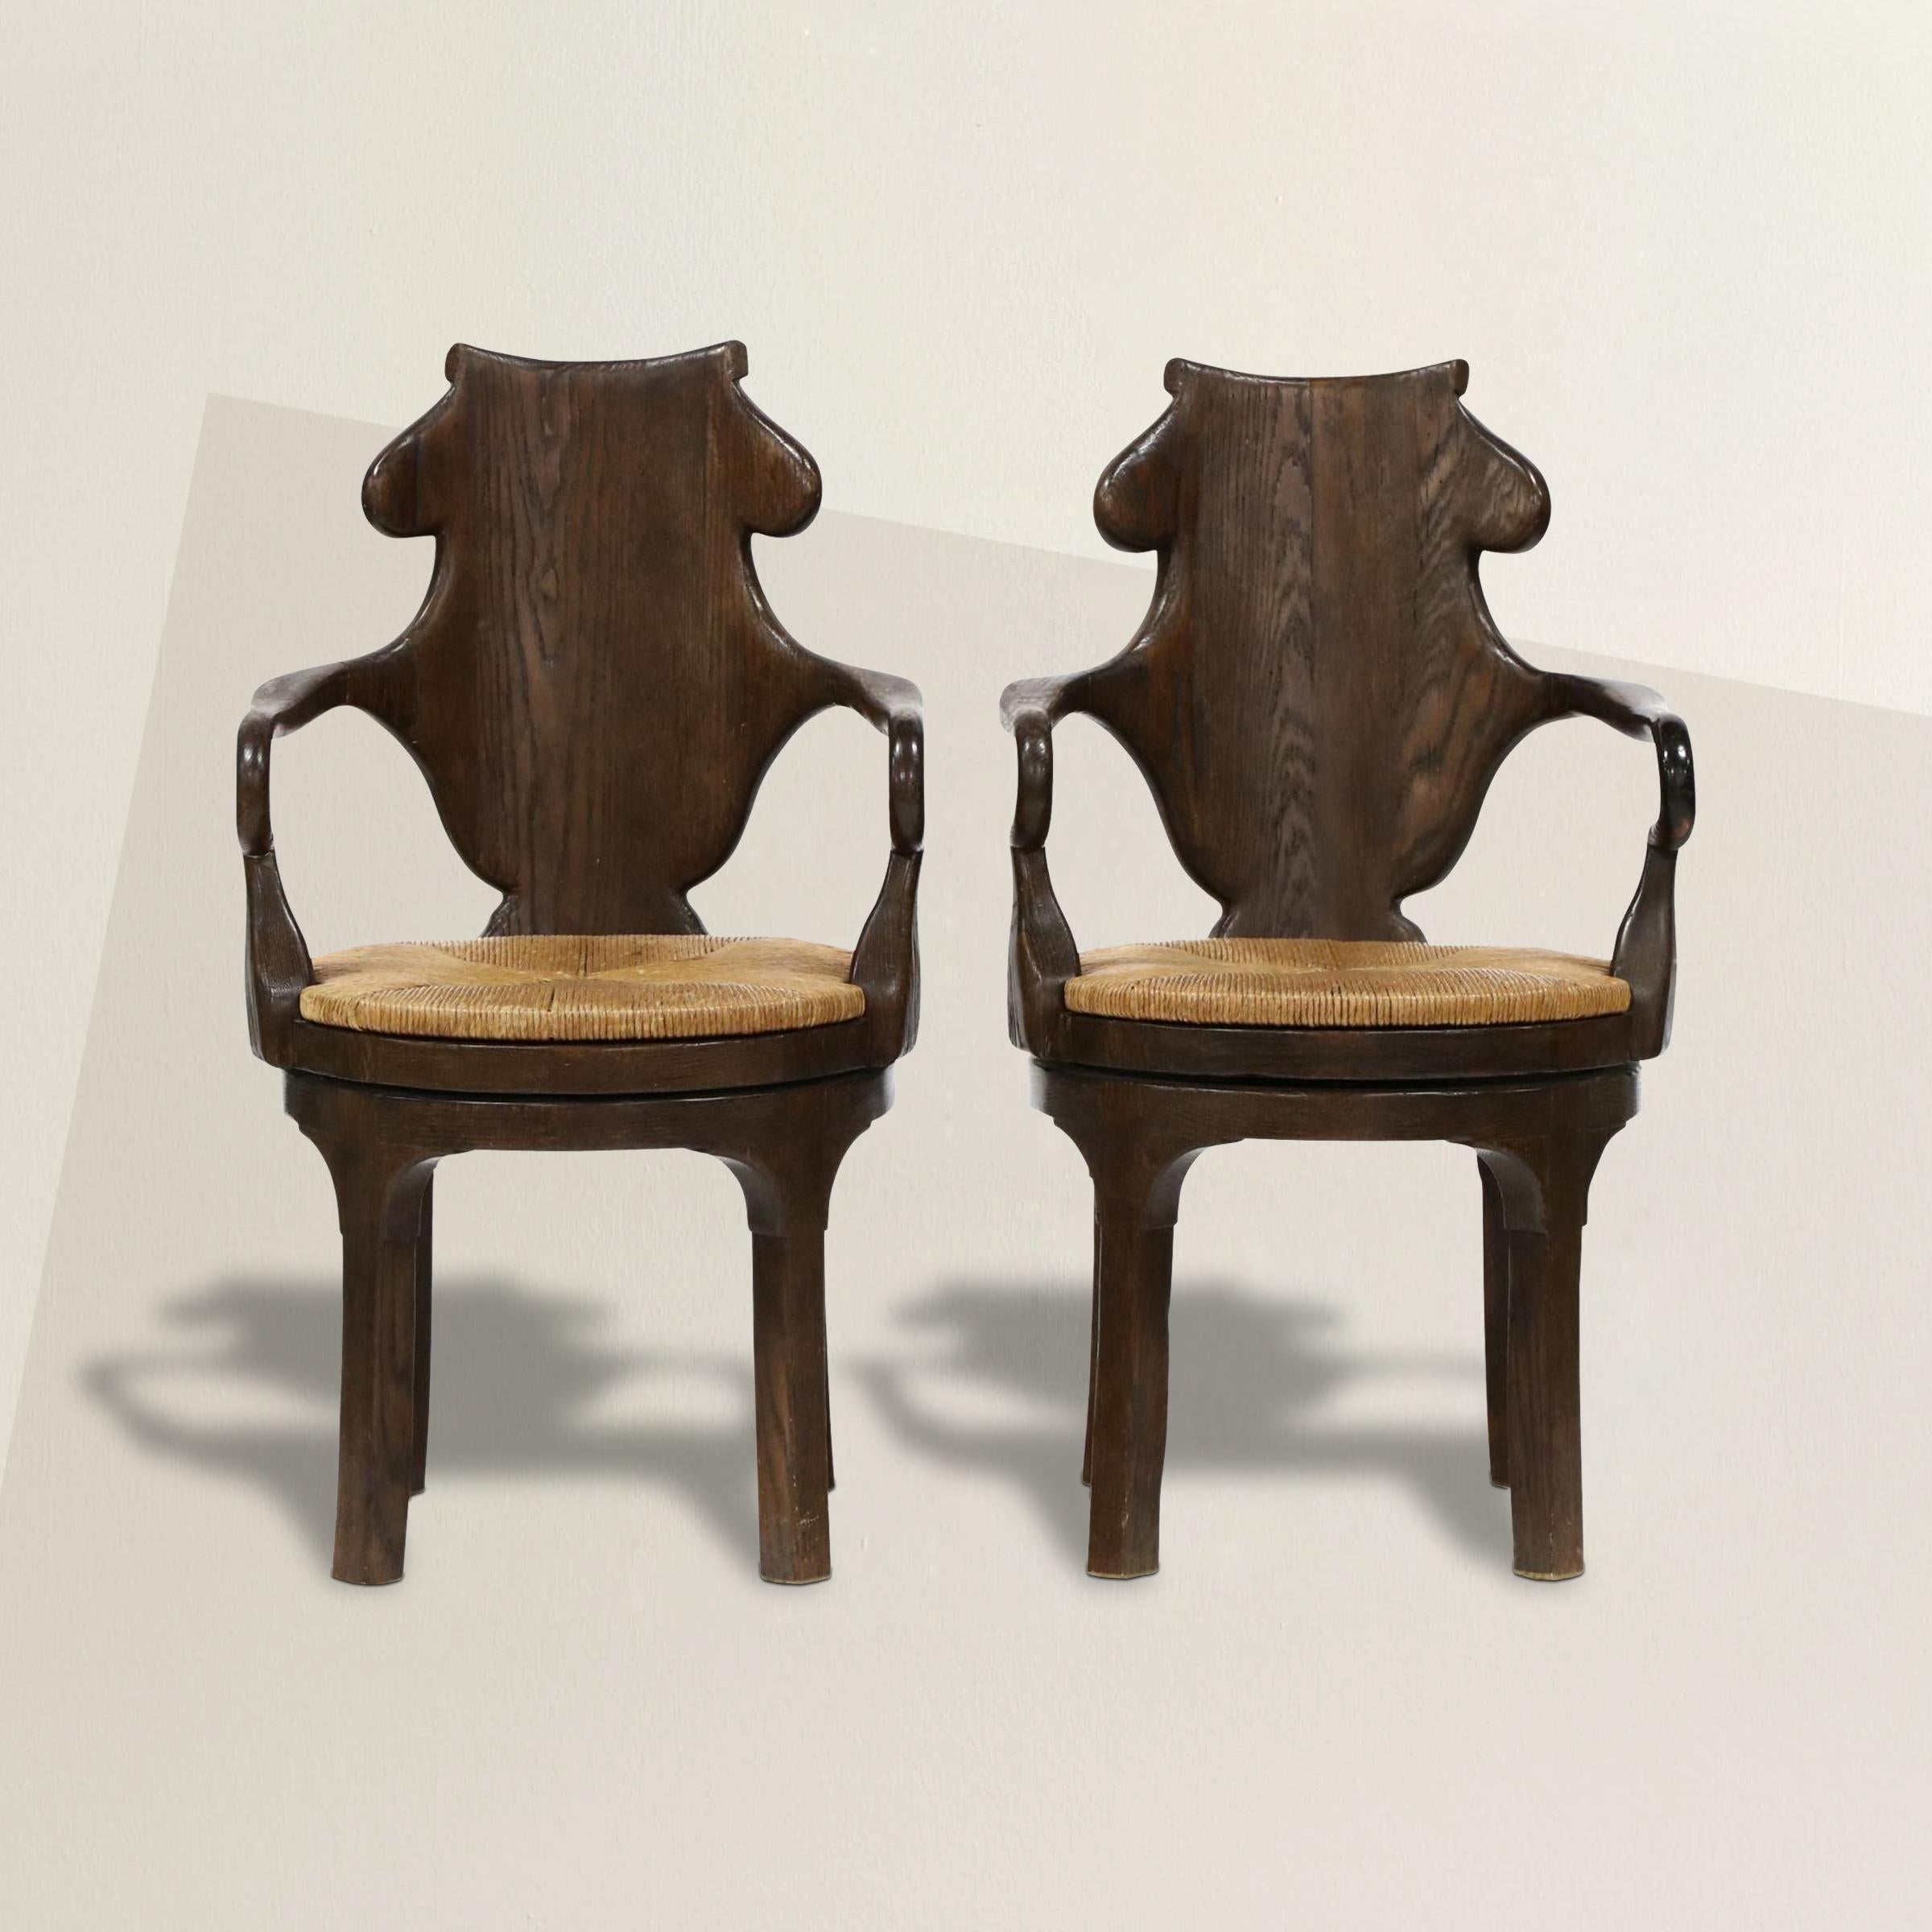 Inspired by 18th century English Georgian chairs, this pair of Rose Tarlow designed Henley oak armchairs feature highly sculptural backs, sensually curved arms, and with removable rush seats that swivel. Perfect dining chairs, but also suitable for